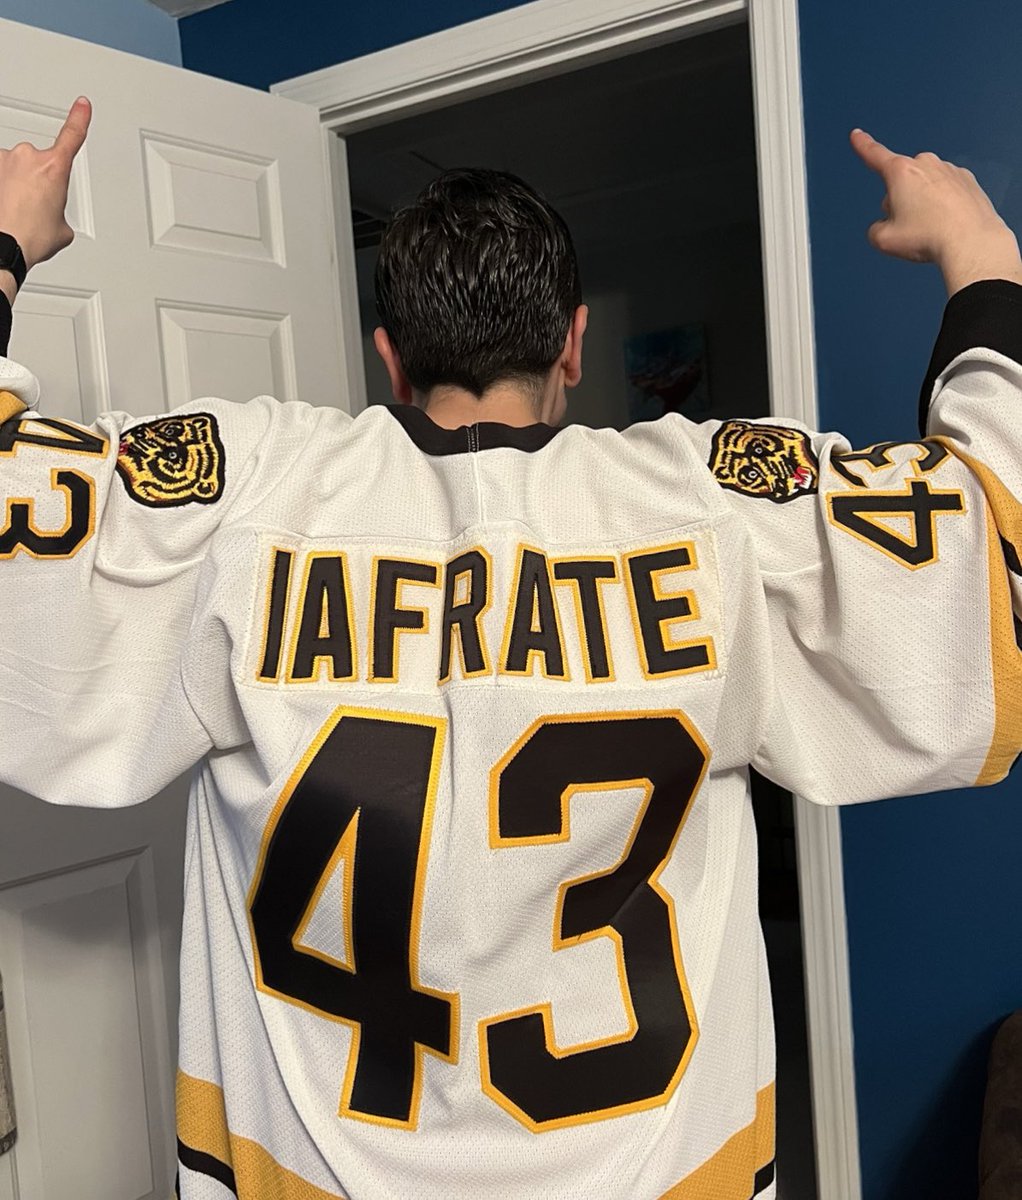 Already feeling fired up for the @NHLBruins second playoff game tonight! Let’s GOOOO! #letsgobruins #nhlbruins #nhlplayoffs2023